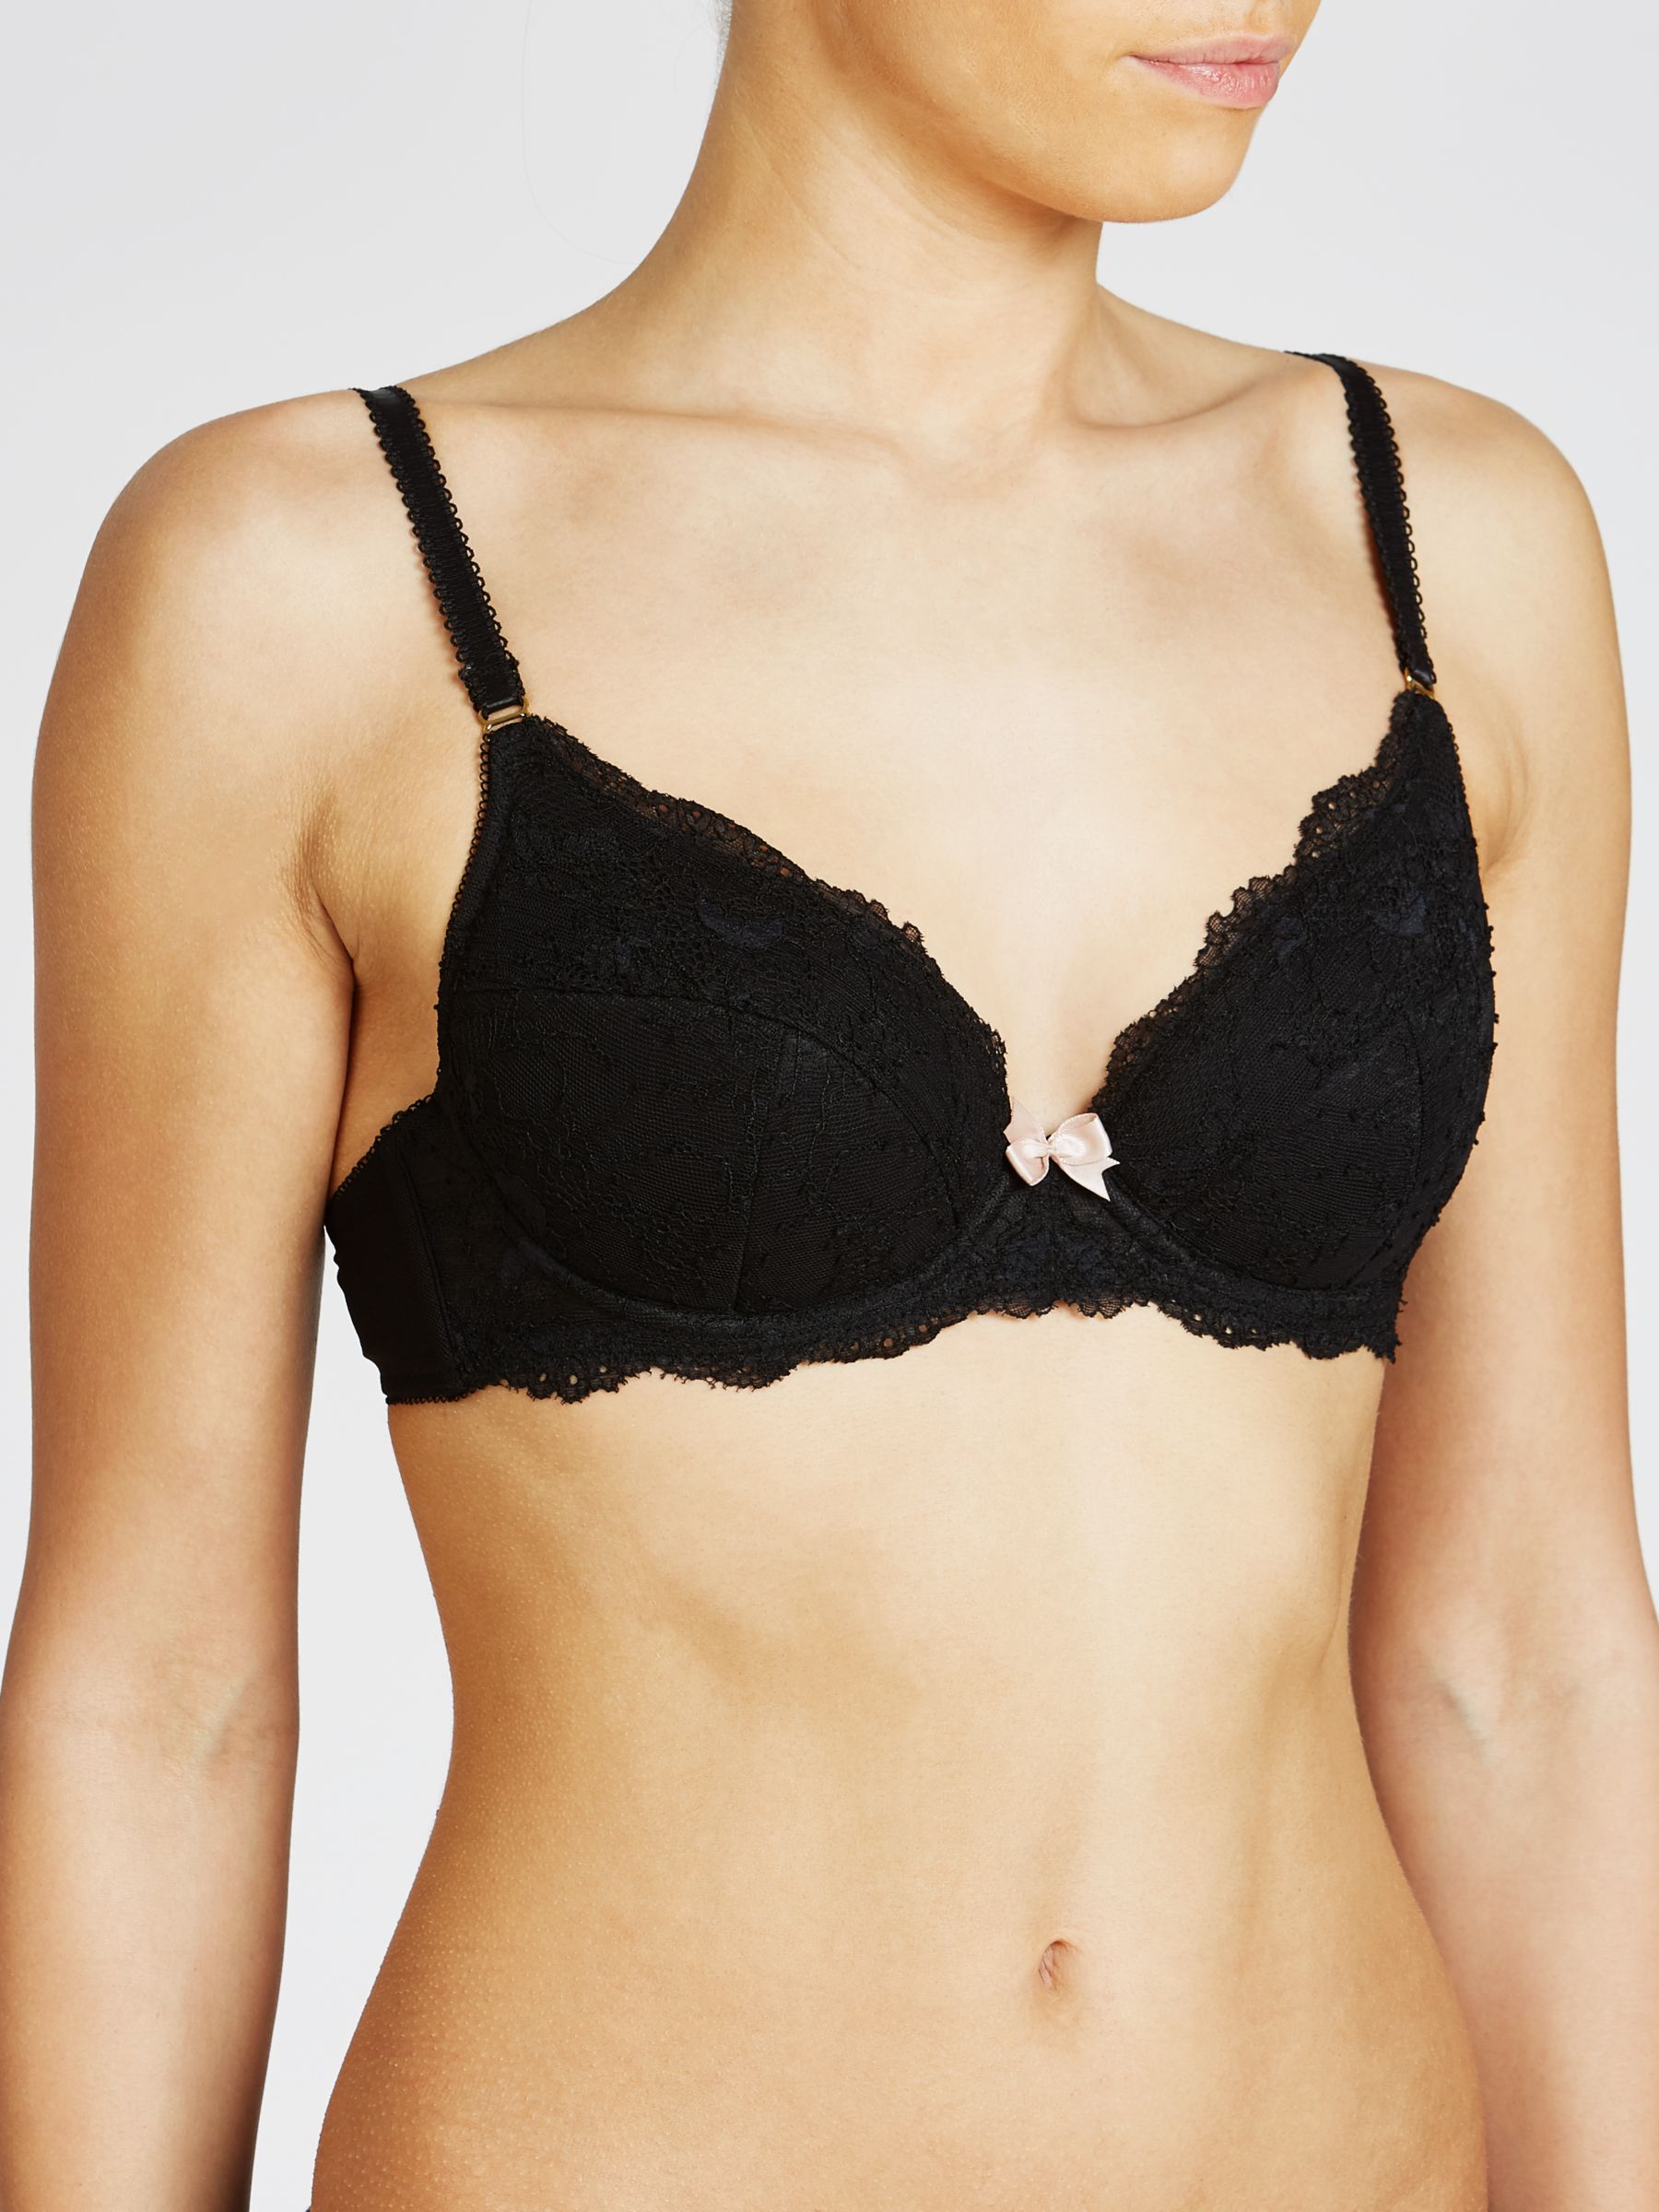 Buy John Lewis Lightweight Cleavage Booster, Almond Online at johnlewis.com